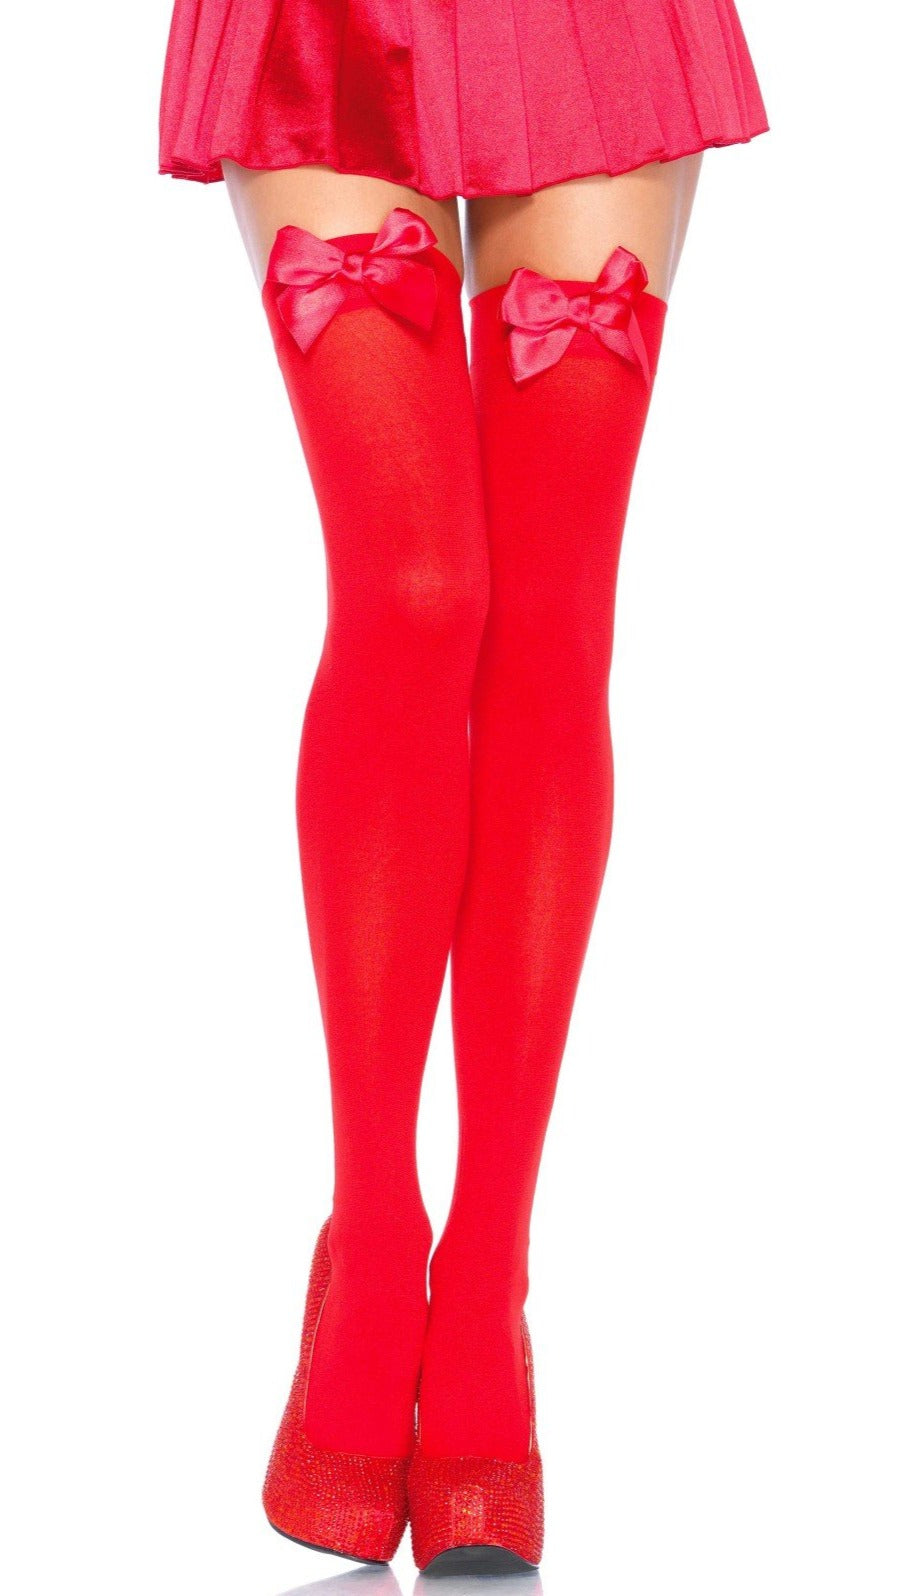 Leg Avenue 6255 Bow Stockings - red opaque thigh high socks with red satin bow